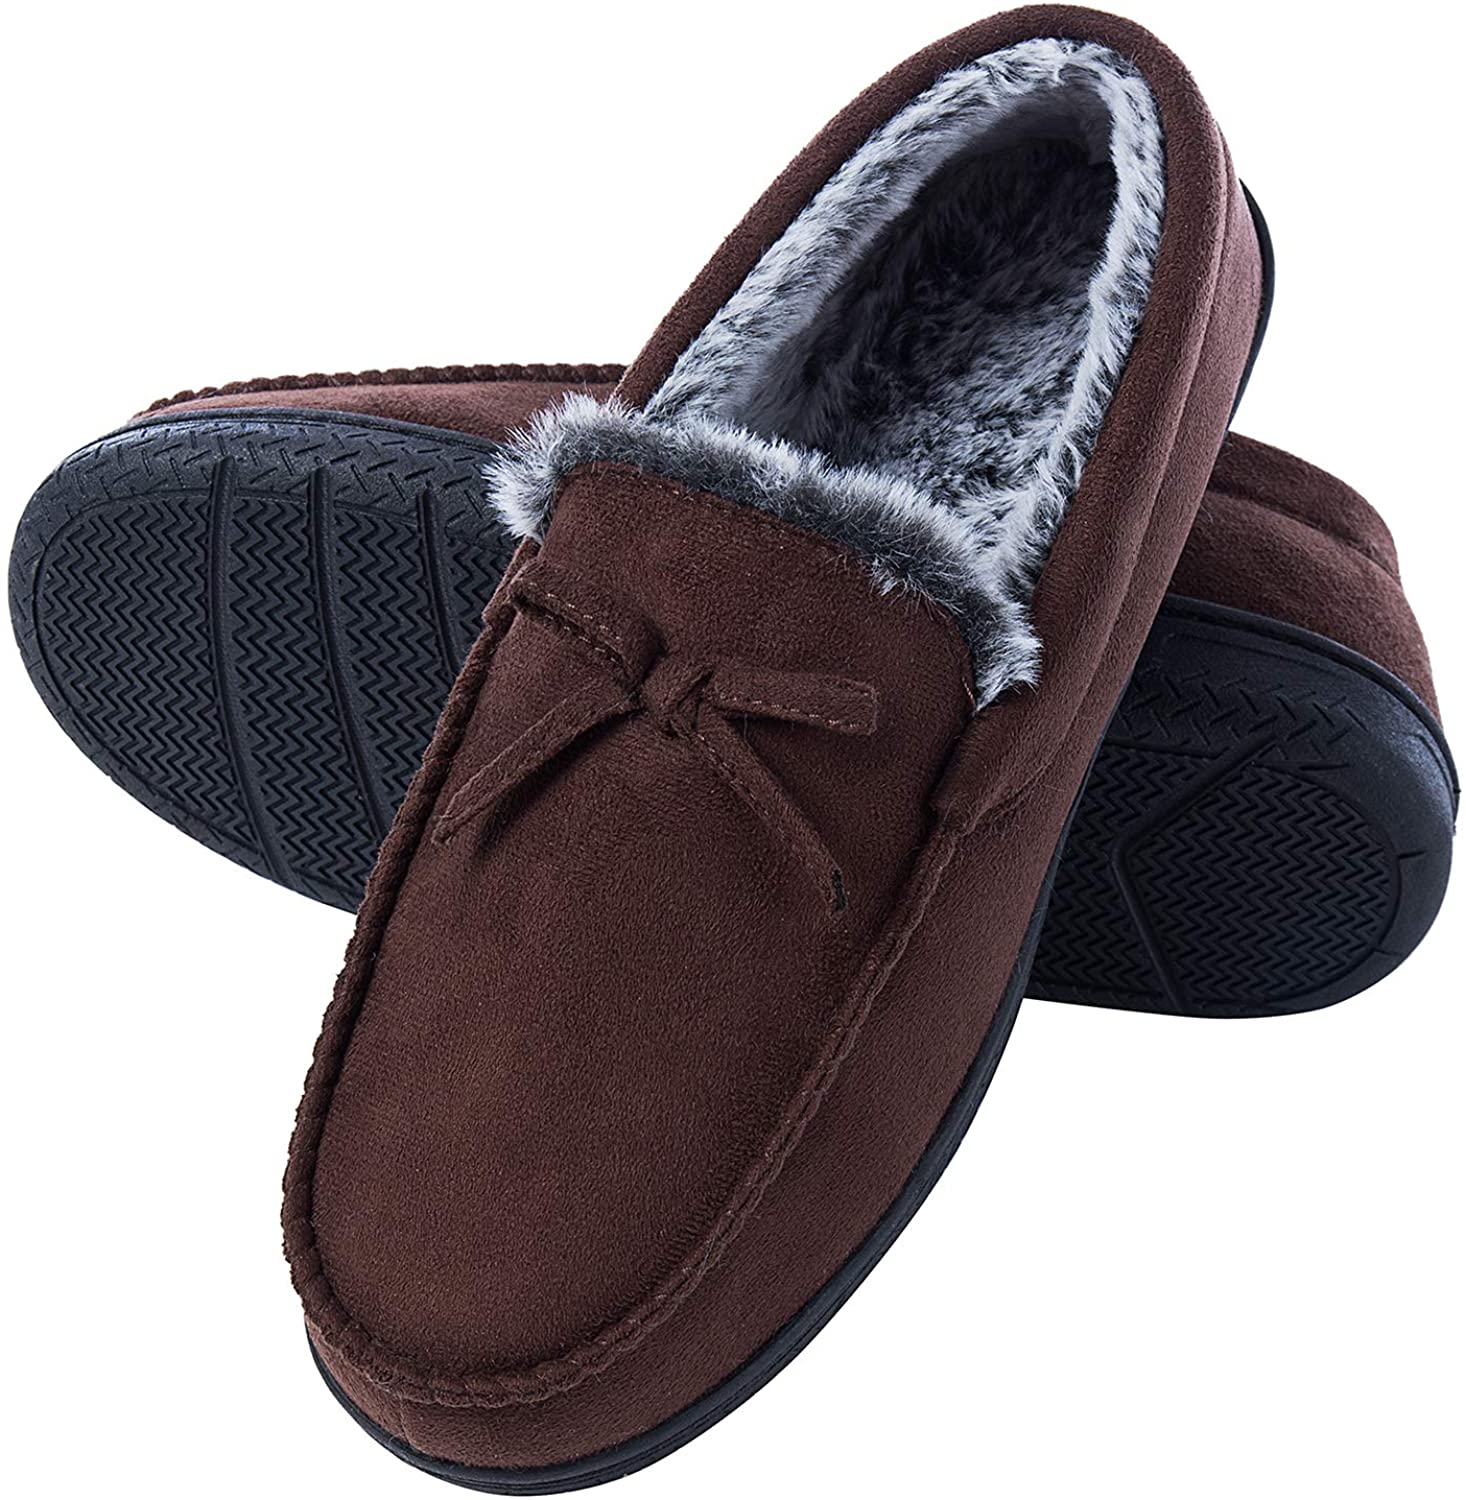 Mens Dr Keller Moccasin House Slipper Faux Suede Navy and Tan colours Fur inside 